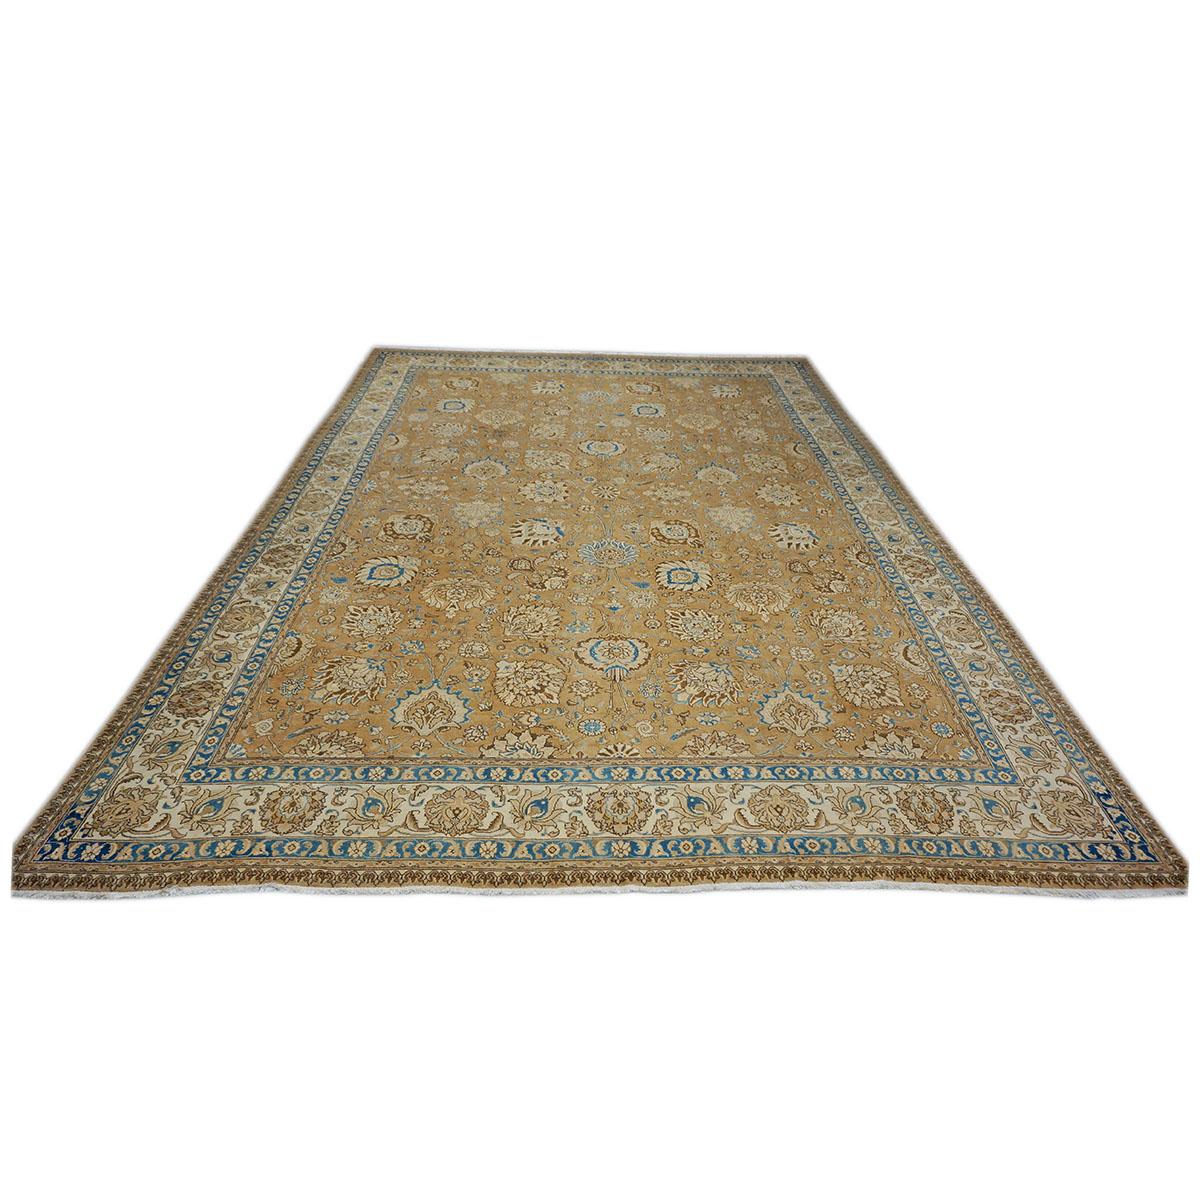  Ashly Fine Rugs presents a 1940s Antique Persian Tabriz 11x15 Wool Handmade Rug. Tabriz is a northern city in modern-day Iran and has forever been famous for the fineness and craftsmanship of its handmade rugs.

 This rug has a brown background